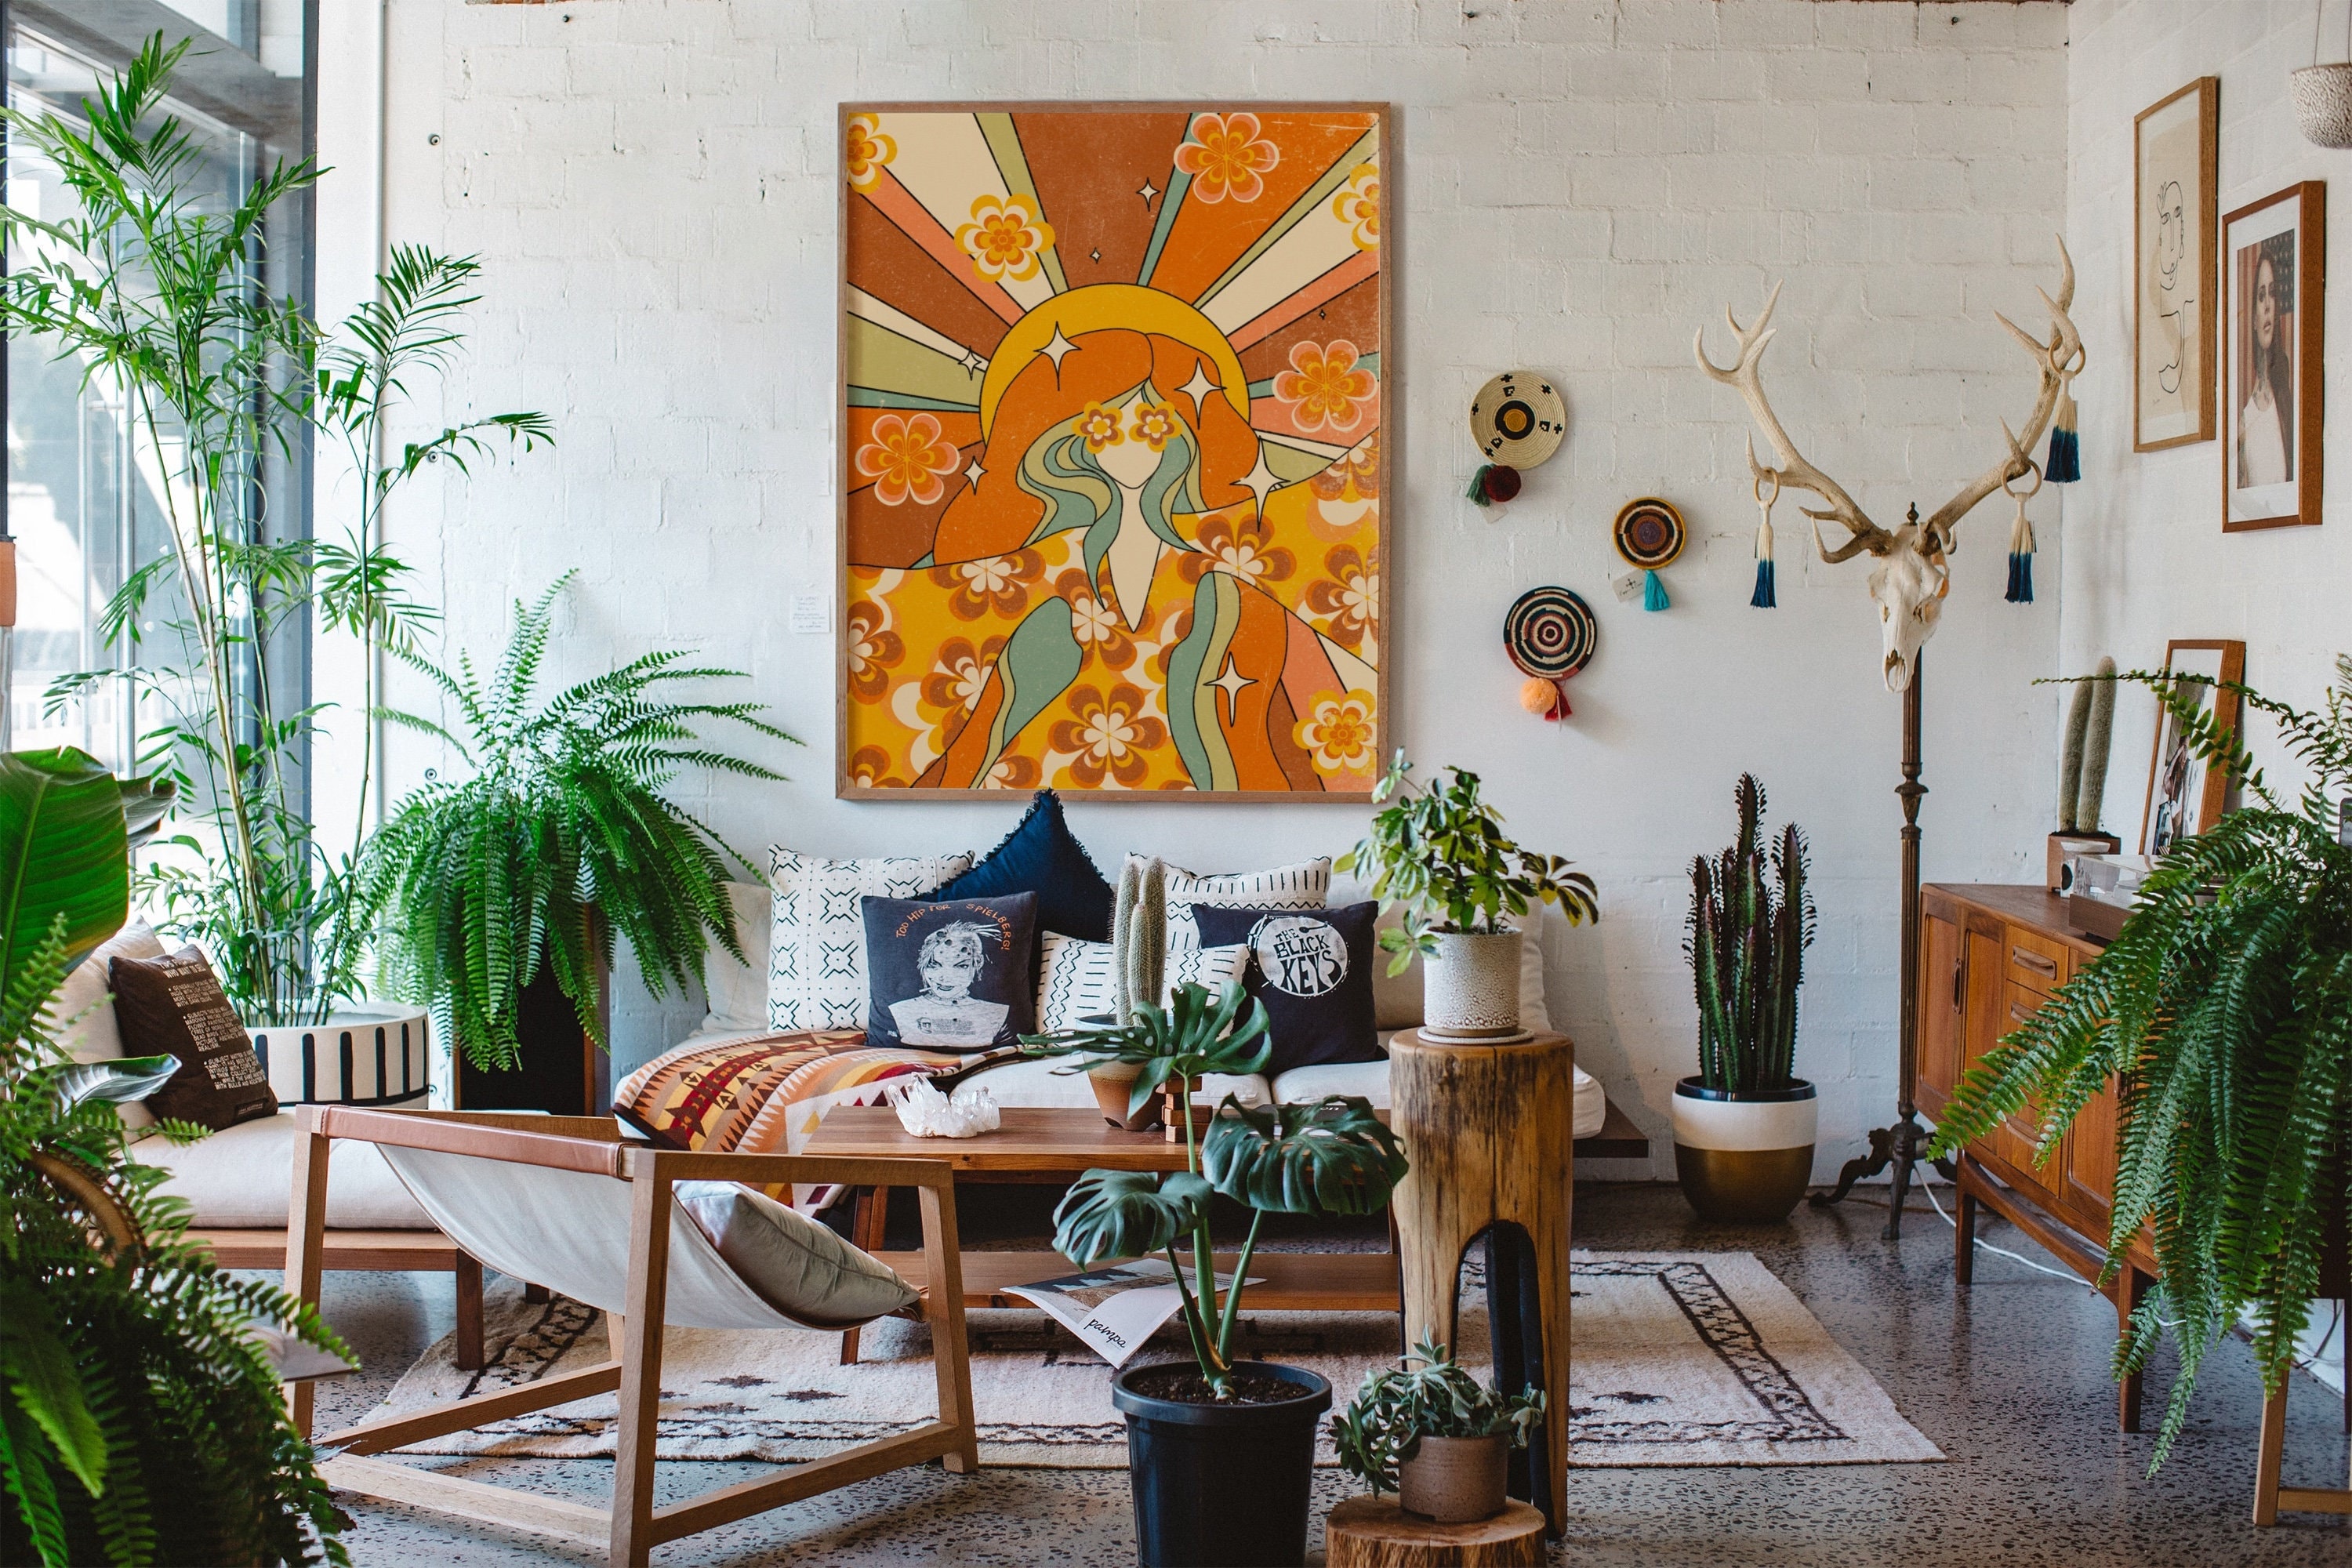 70s-inspired room decor 70s to bring retro vibes to your space